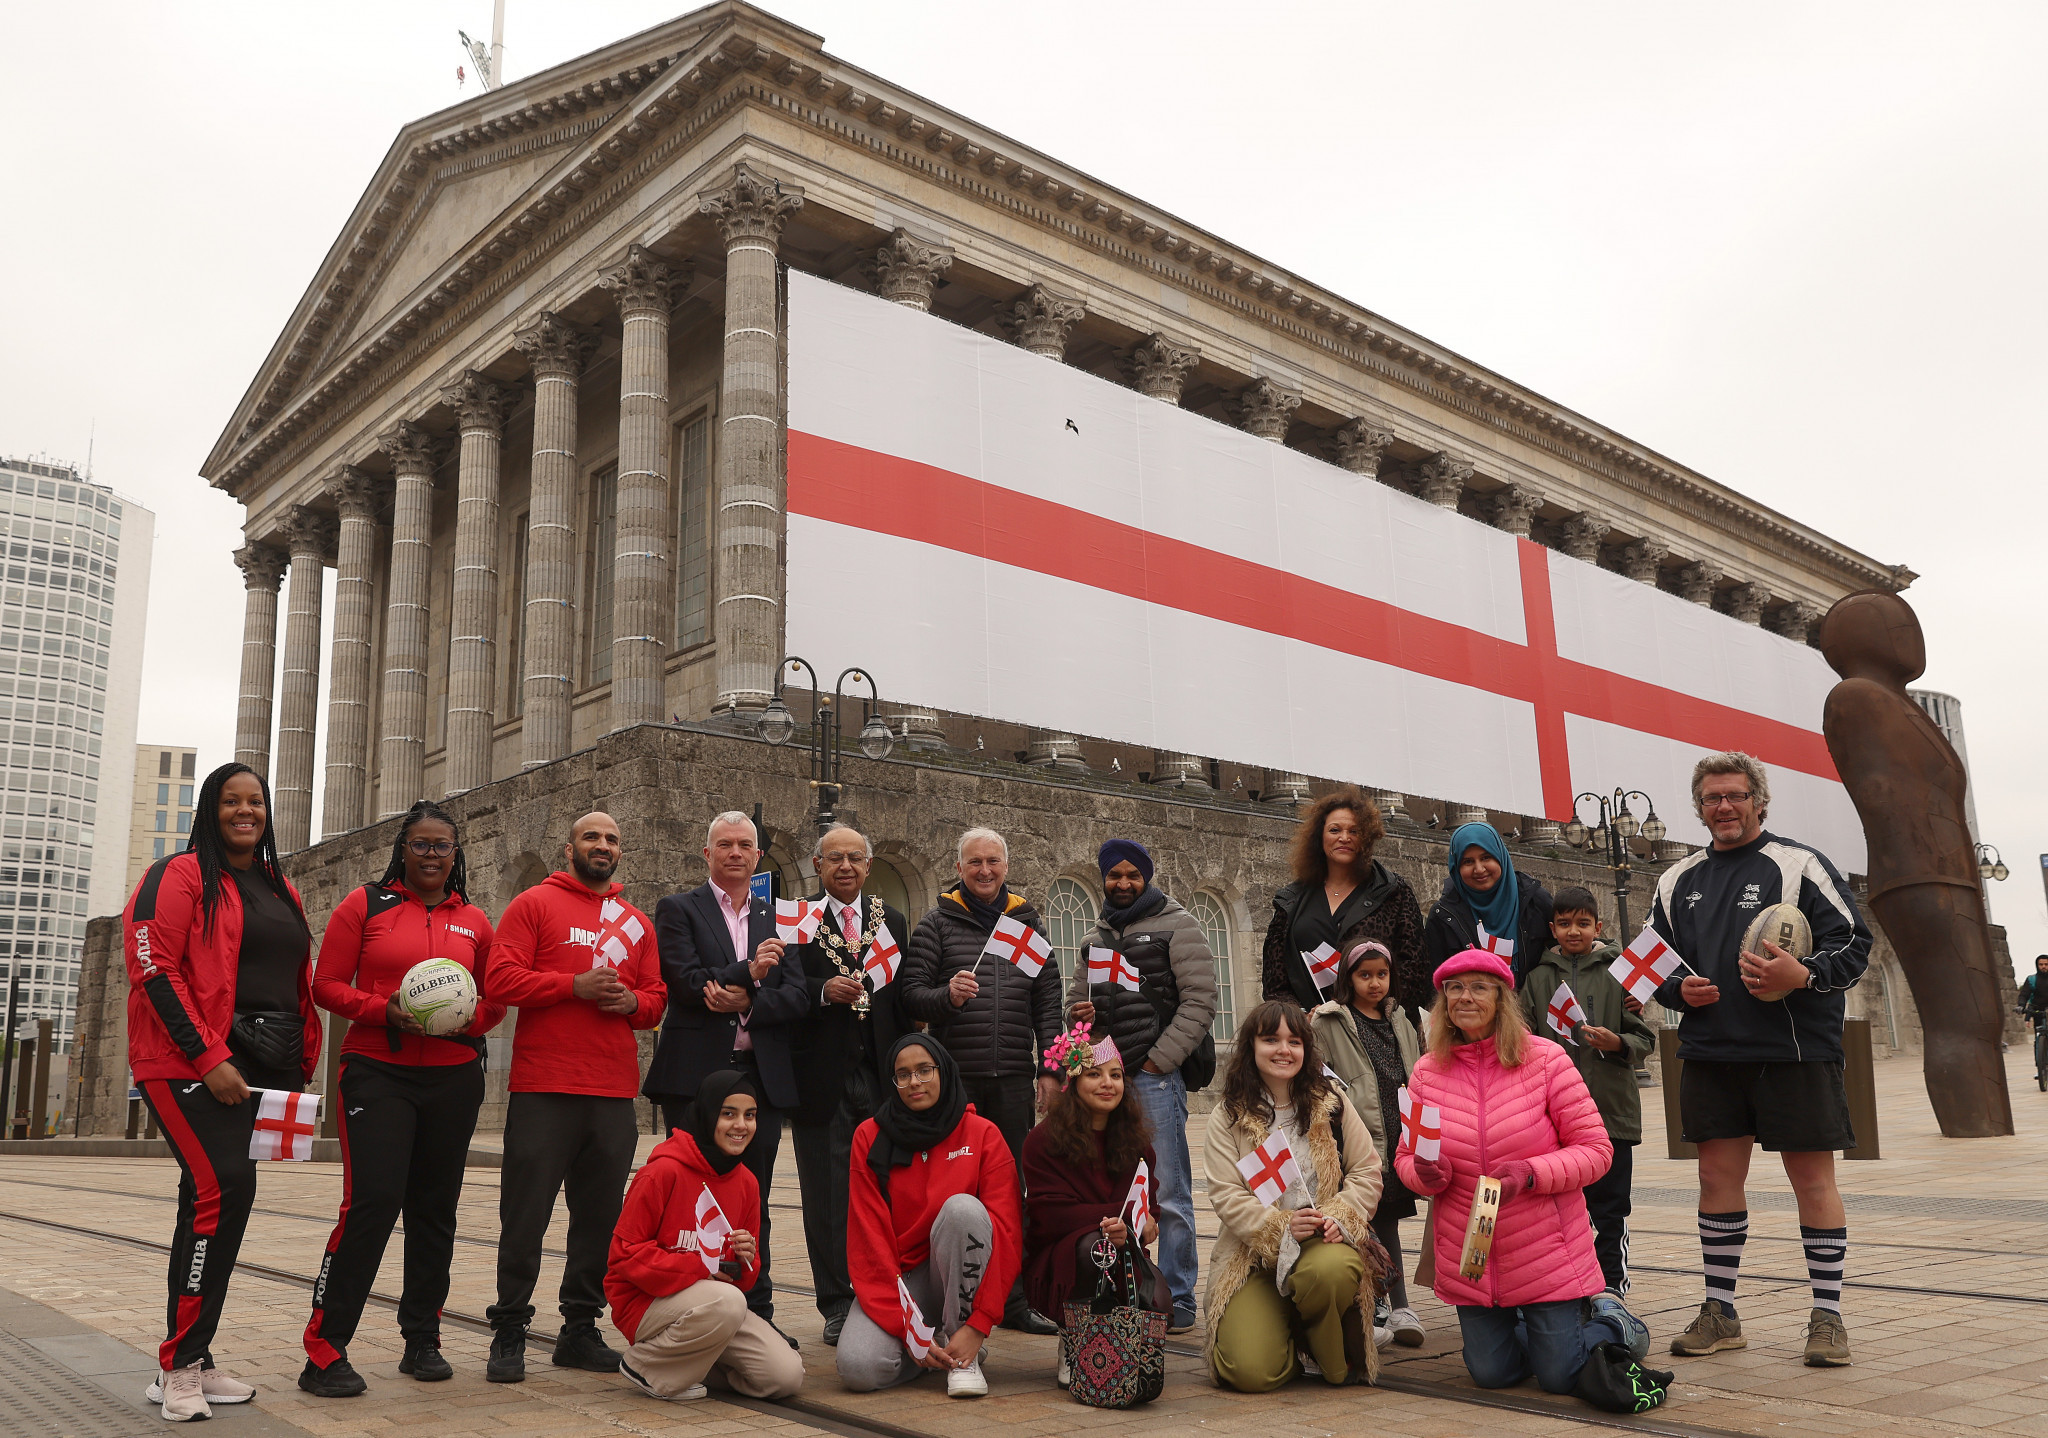 The city's community had the chance to discuss the expectations for the Games with Team England athletes ©Birmingham City Council